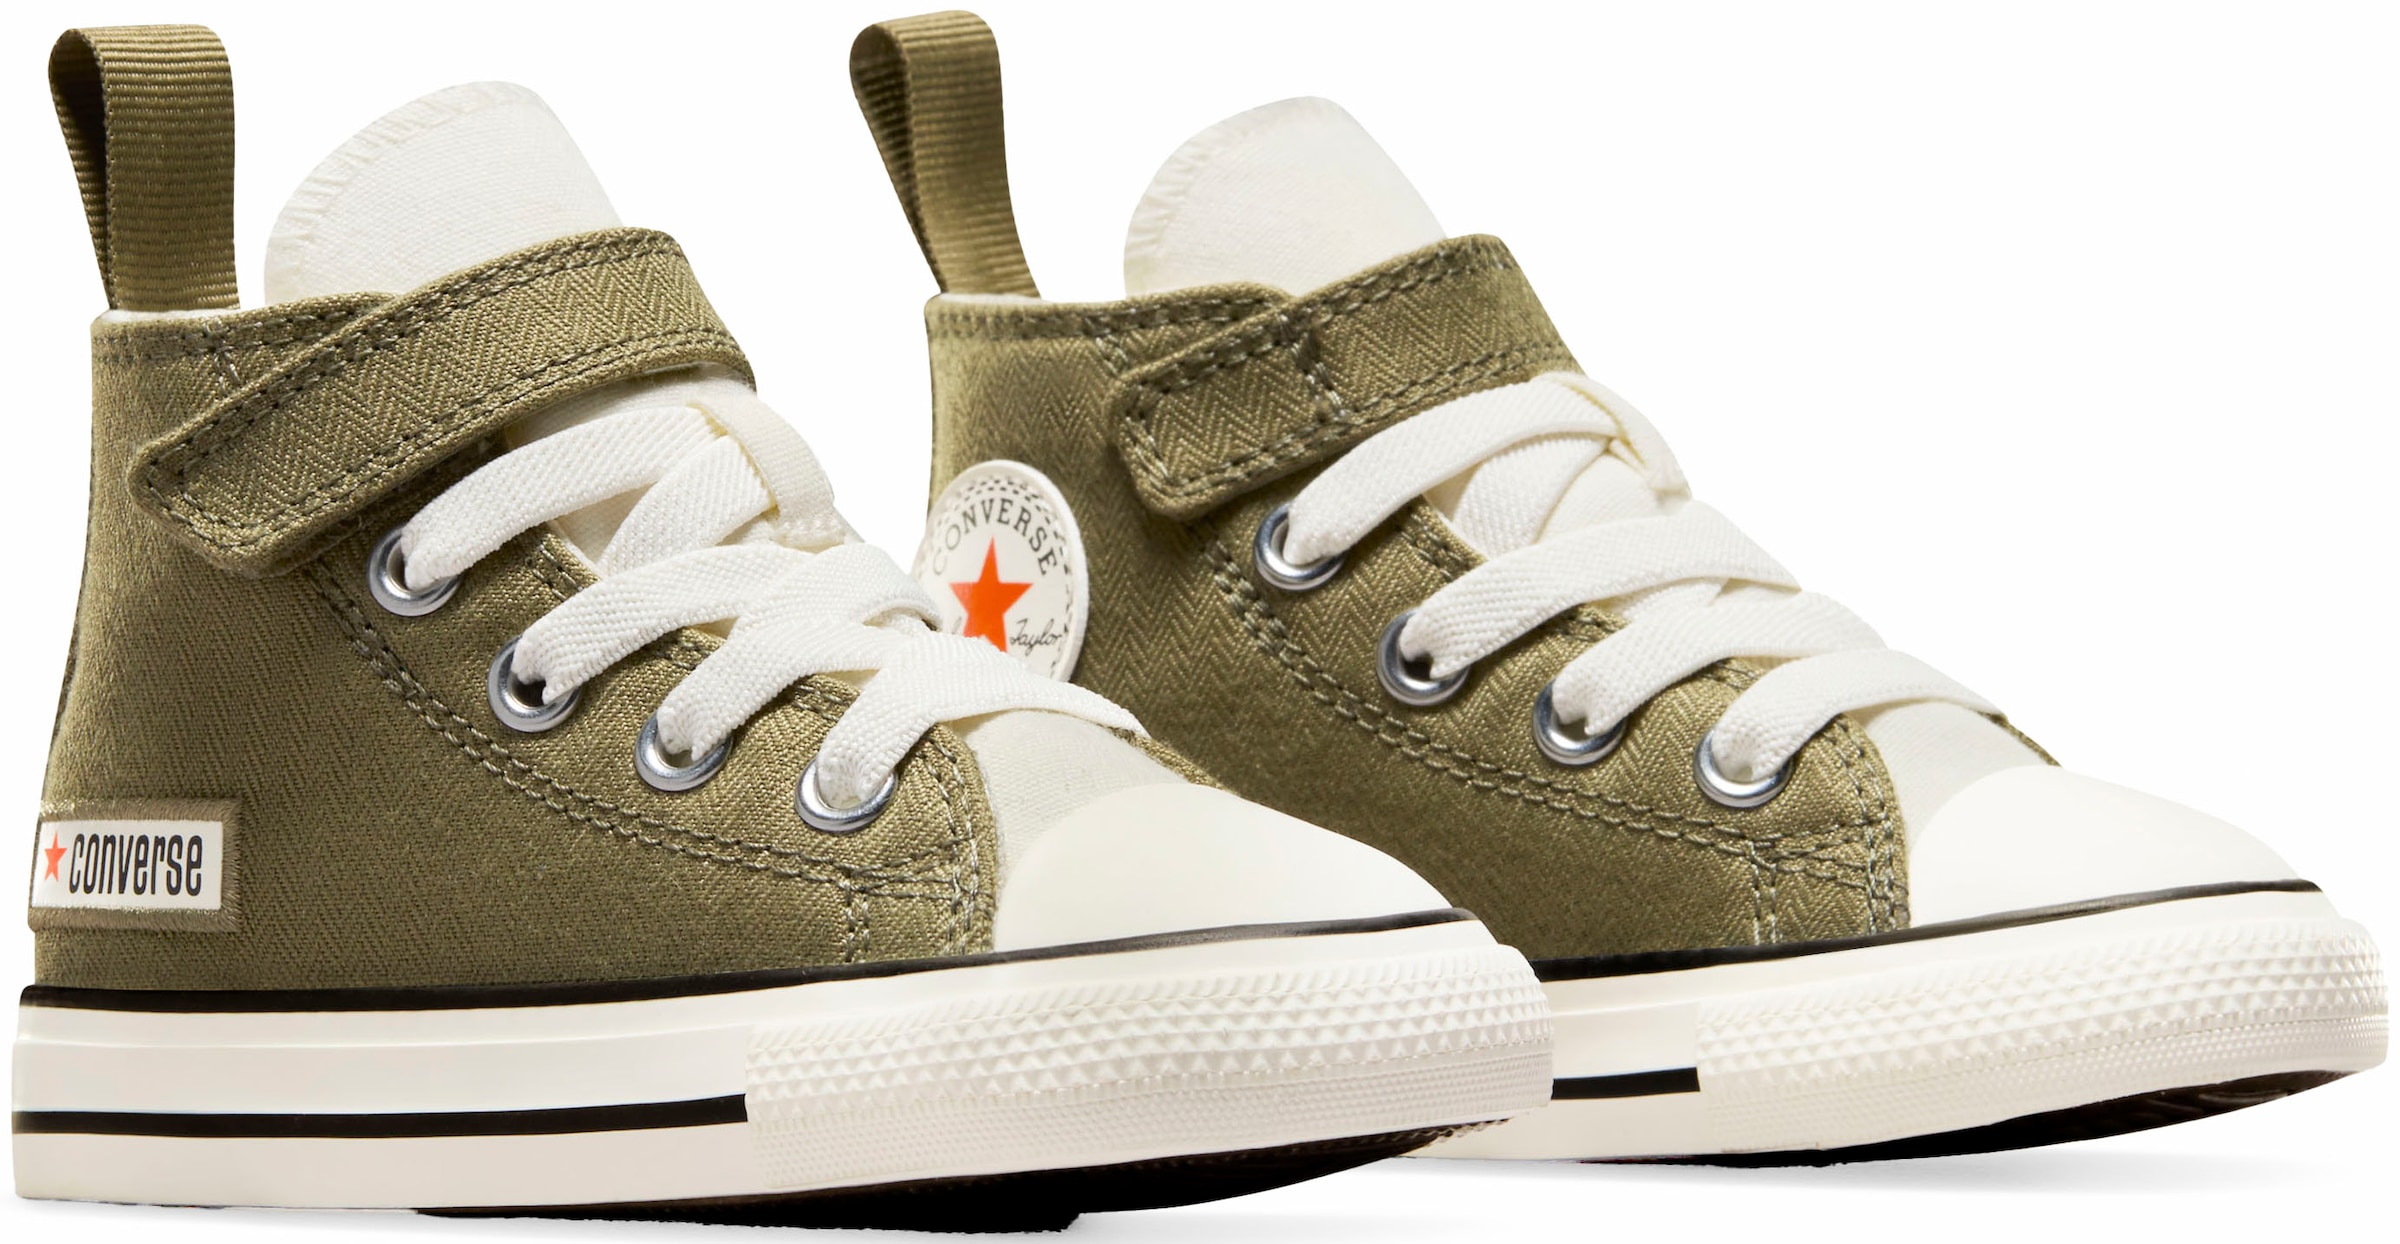 Sneaker »CHUCK TAYLOR ALL STAR EASY ON«